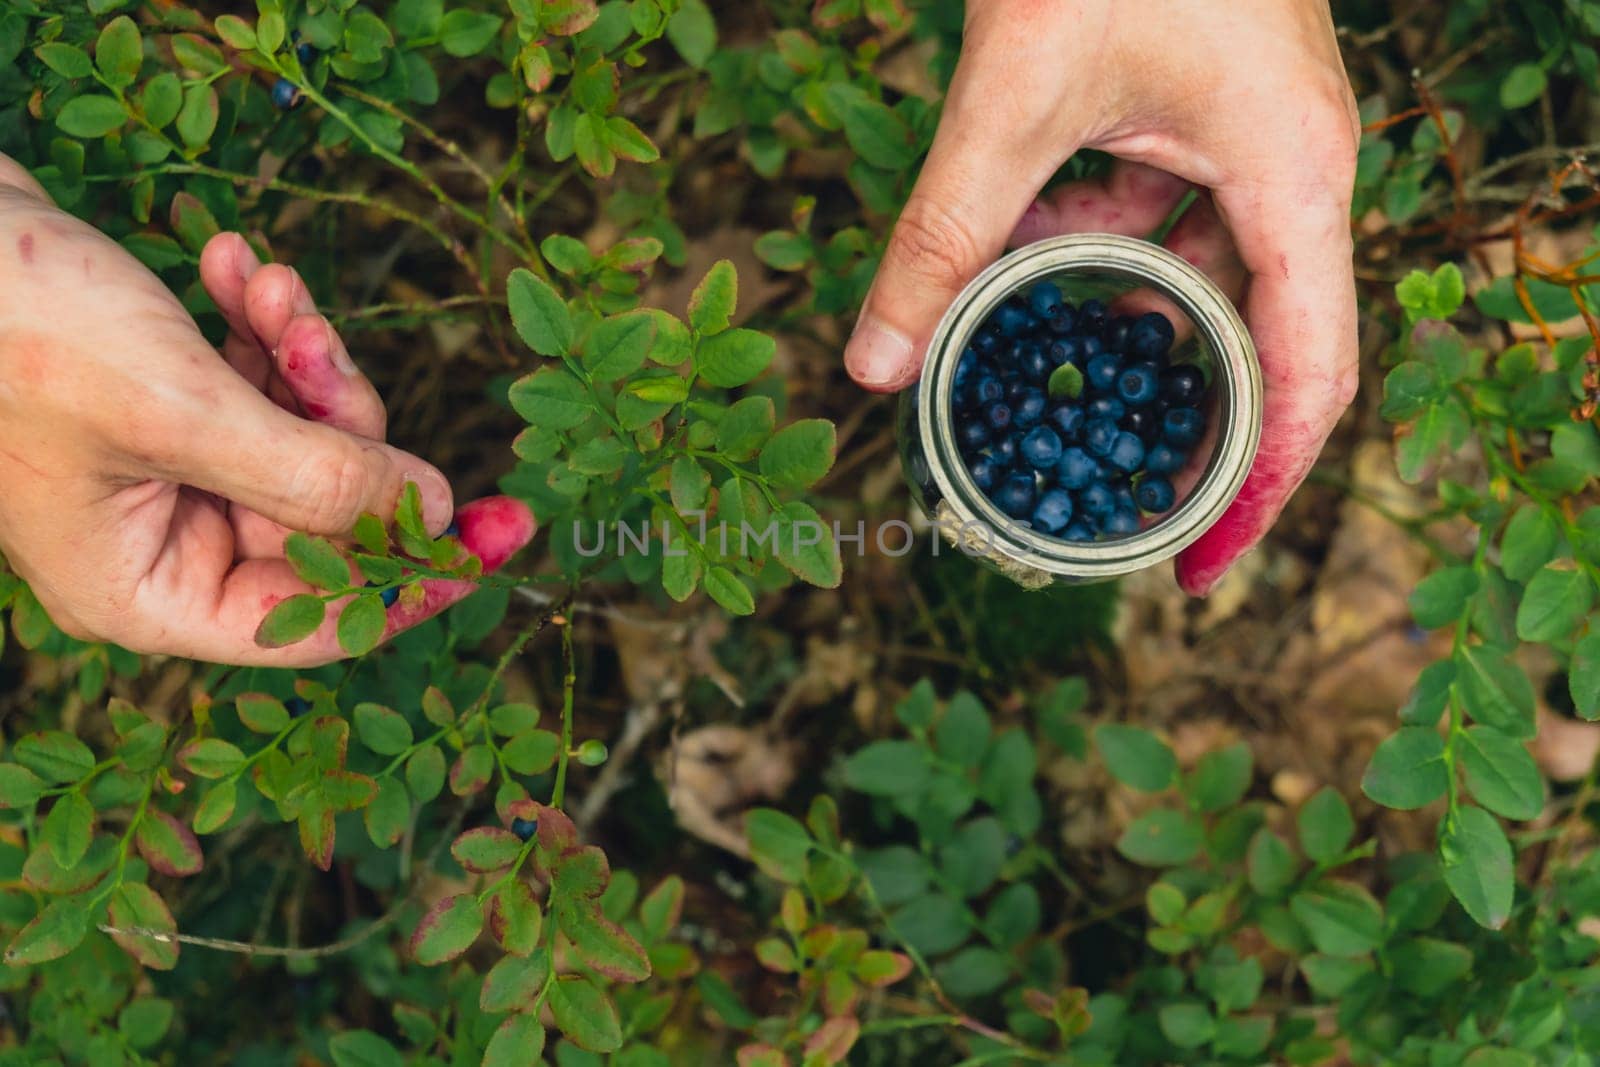 Close-up of male hands picking Blueberries in the forest with green leaves. Man Harvested berries, process of collecting, harvesting berries into glass jar in the forest. Copy space Bush of ripe wild blackberry bilberry in summer.